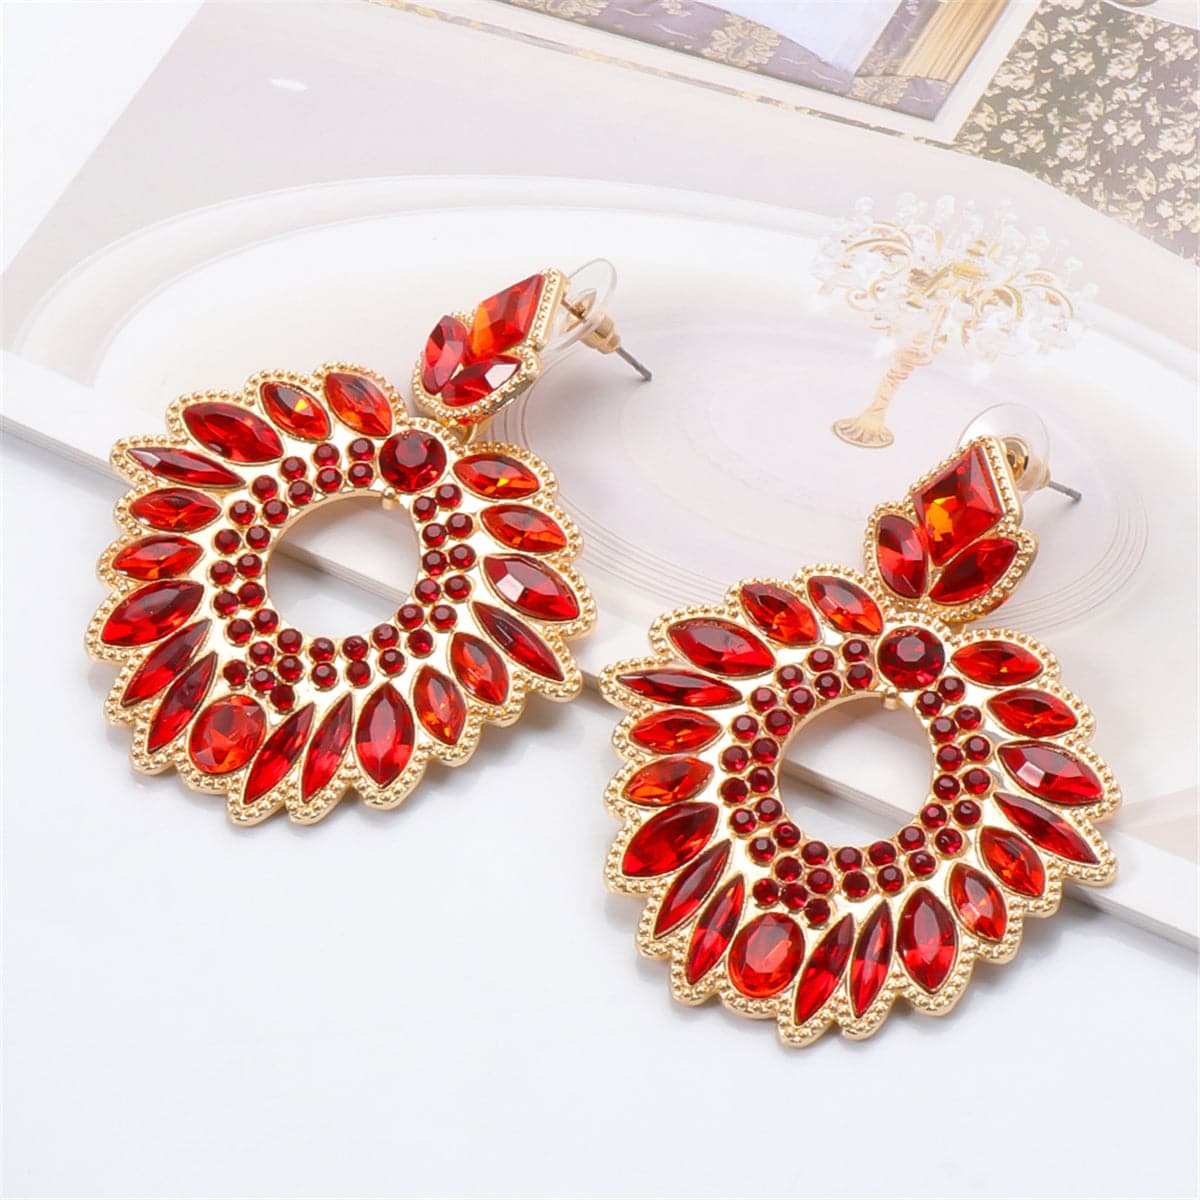 Red Crystal & Cubic Zirconia 18K Gold-Plated Geometric Drop Earrings